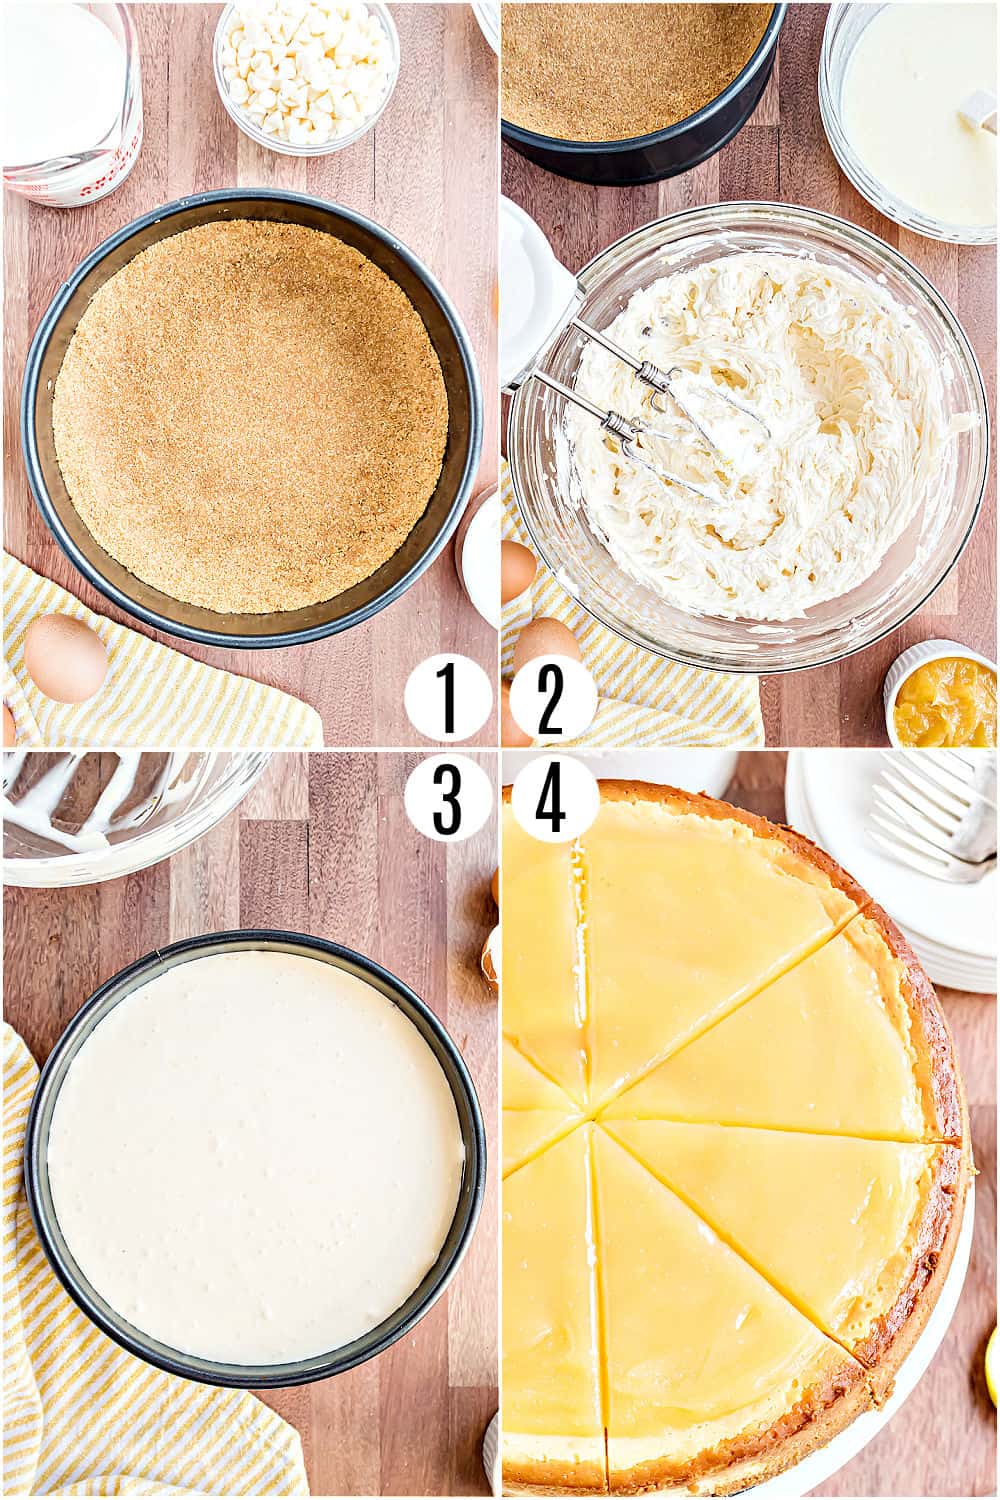 Step by step photos showing how to make lemon cheesecake.